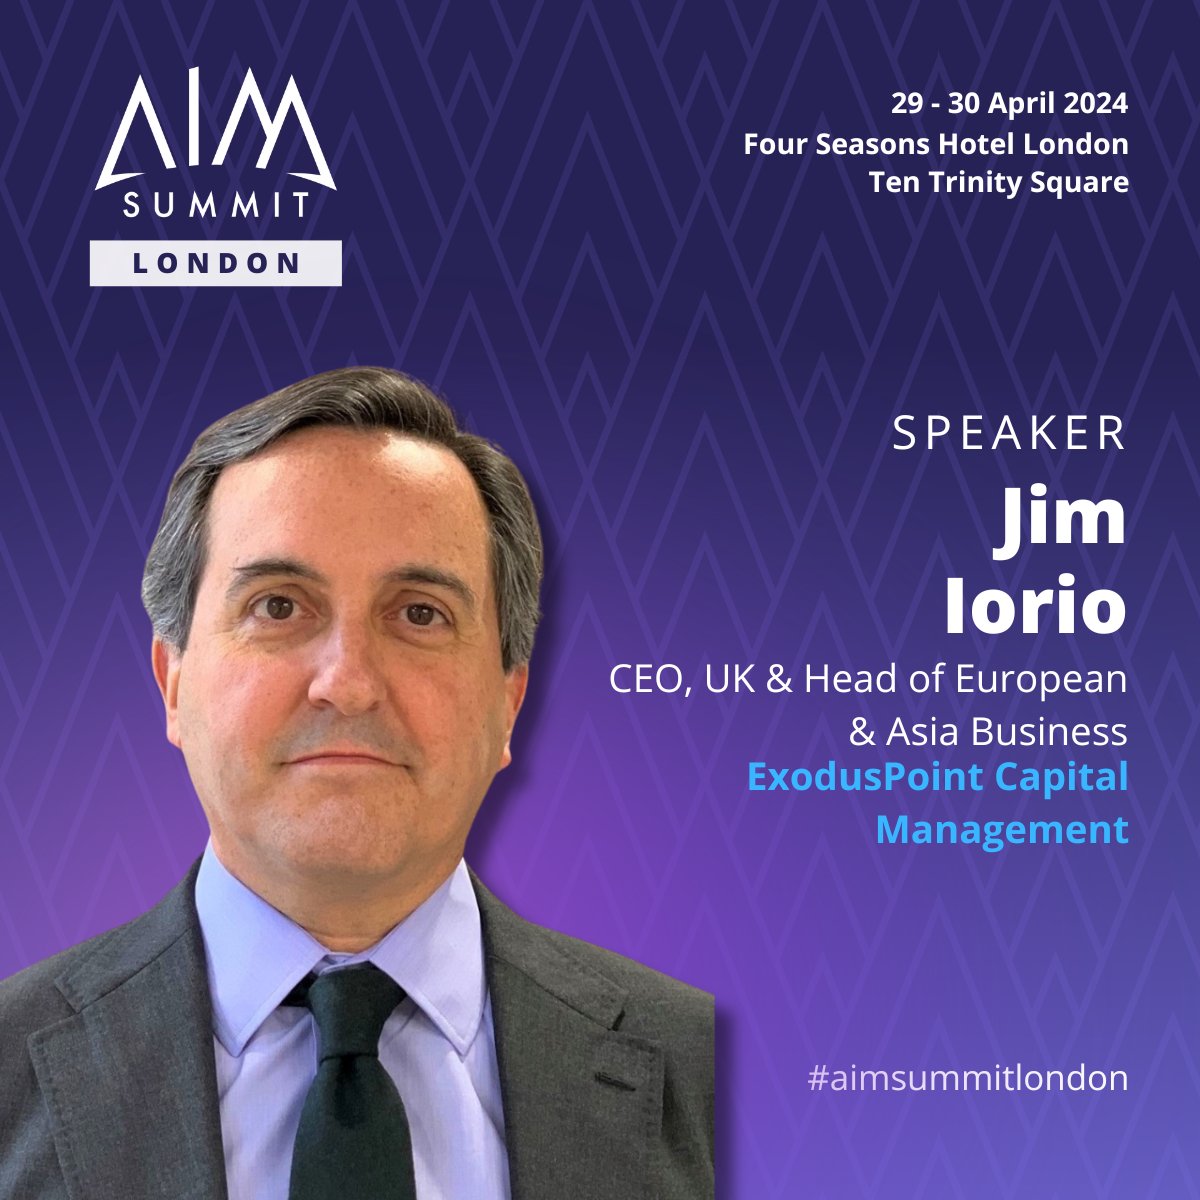 Gain valuable perspectives on 'Which Regions are Leading the Hedge Fund Market?' with Jim Iorio at AIM Summit London 2024! Apply to attend here: lnkd.in/dhfhM87e #alternativeinvestments #aimsummitlondon #hedgefund #exoduspoint